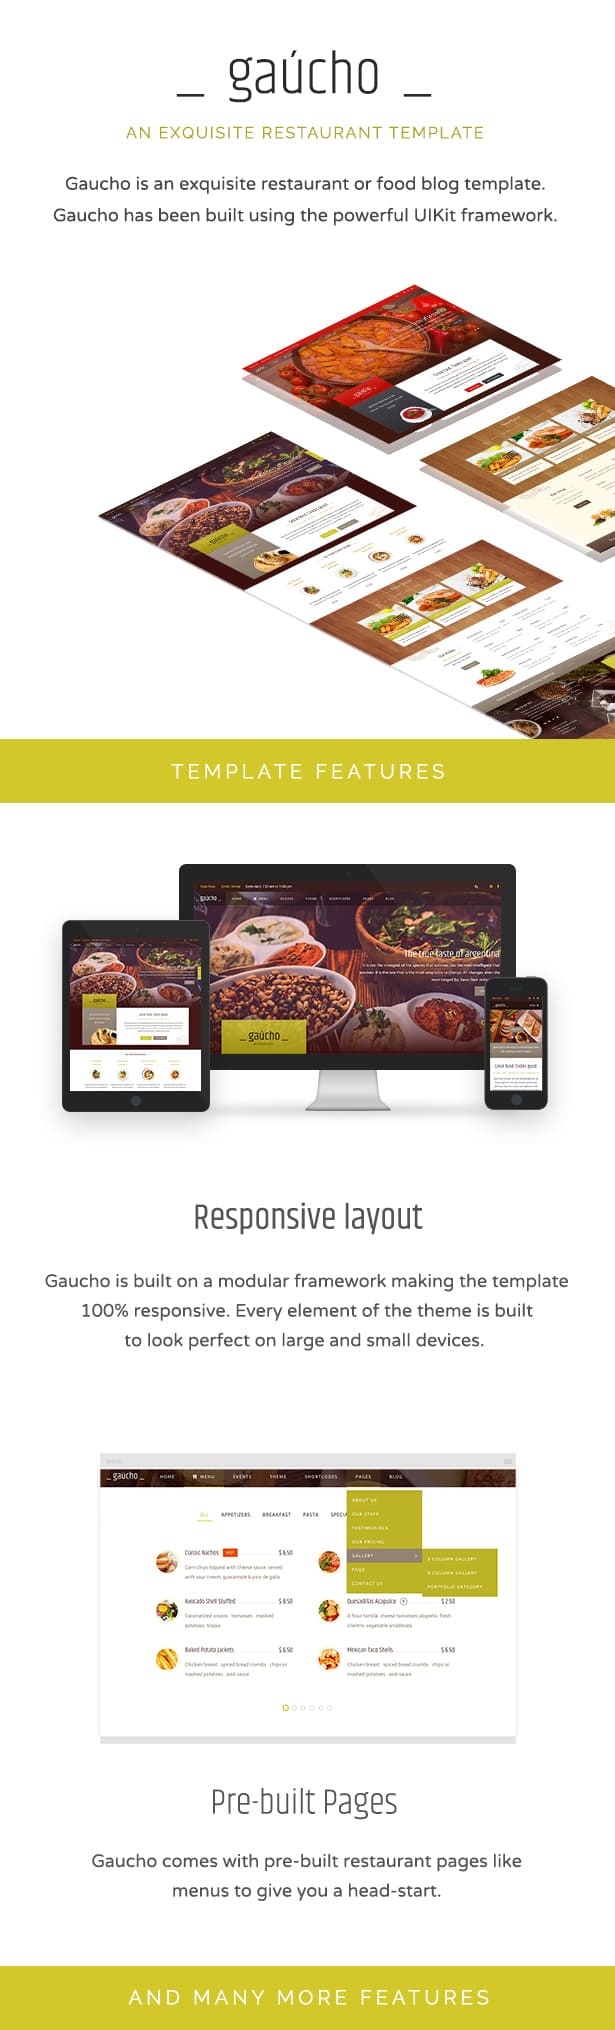 Gaucho is an esquisite restaurant or food blog template.